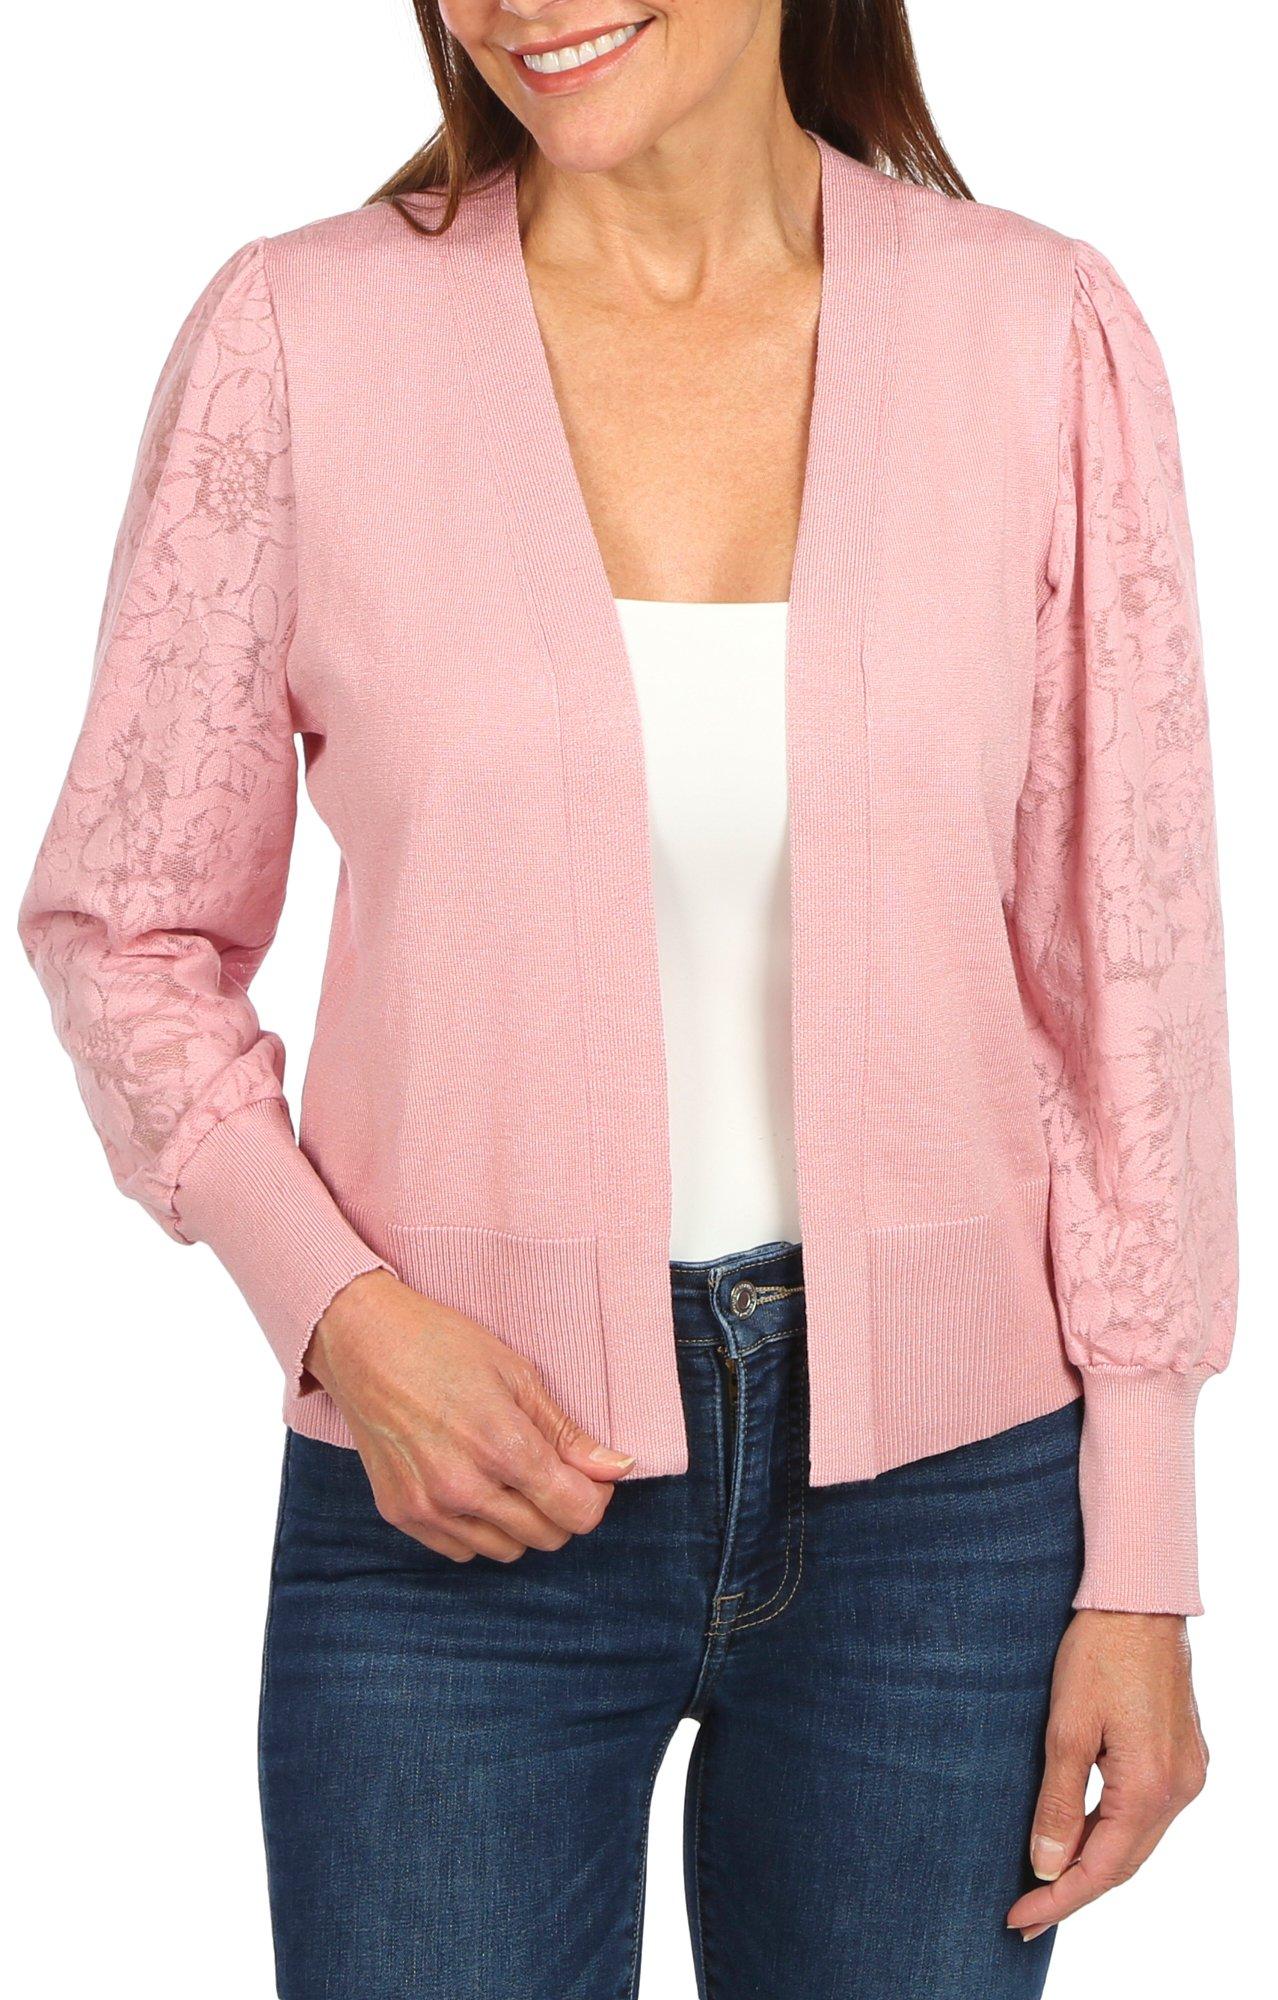 Women's Solid Floral Sleeve Cardigan